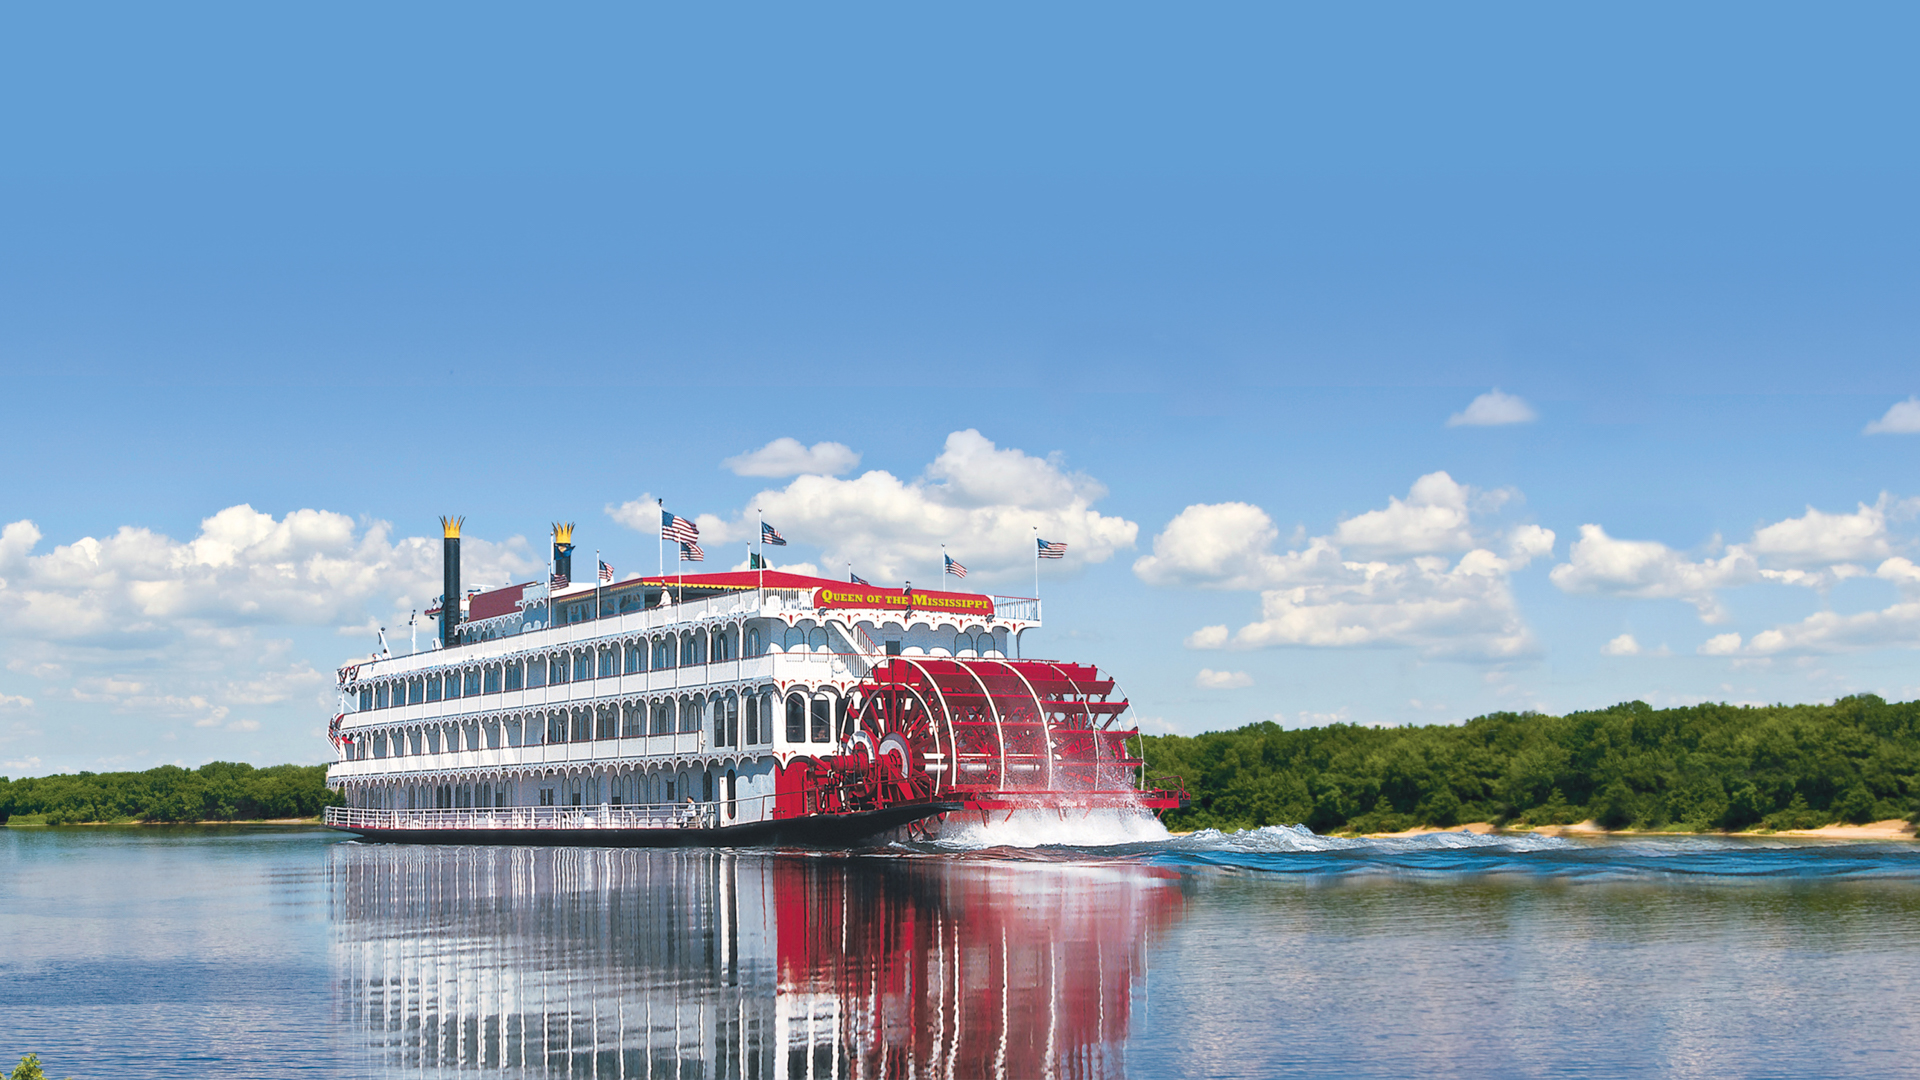 <p>High-priced river cruise packages are aplenty, Geronemus said. But, you can often find companies offering similar and lower-cost cruises onboard older ships. You’ll have fewer amenities but the difference can be thousands of dollars, he said. You won’t miss the amenities much anyway — after all, the point of a river cruise is to see the sights at the ports.</p>